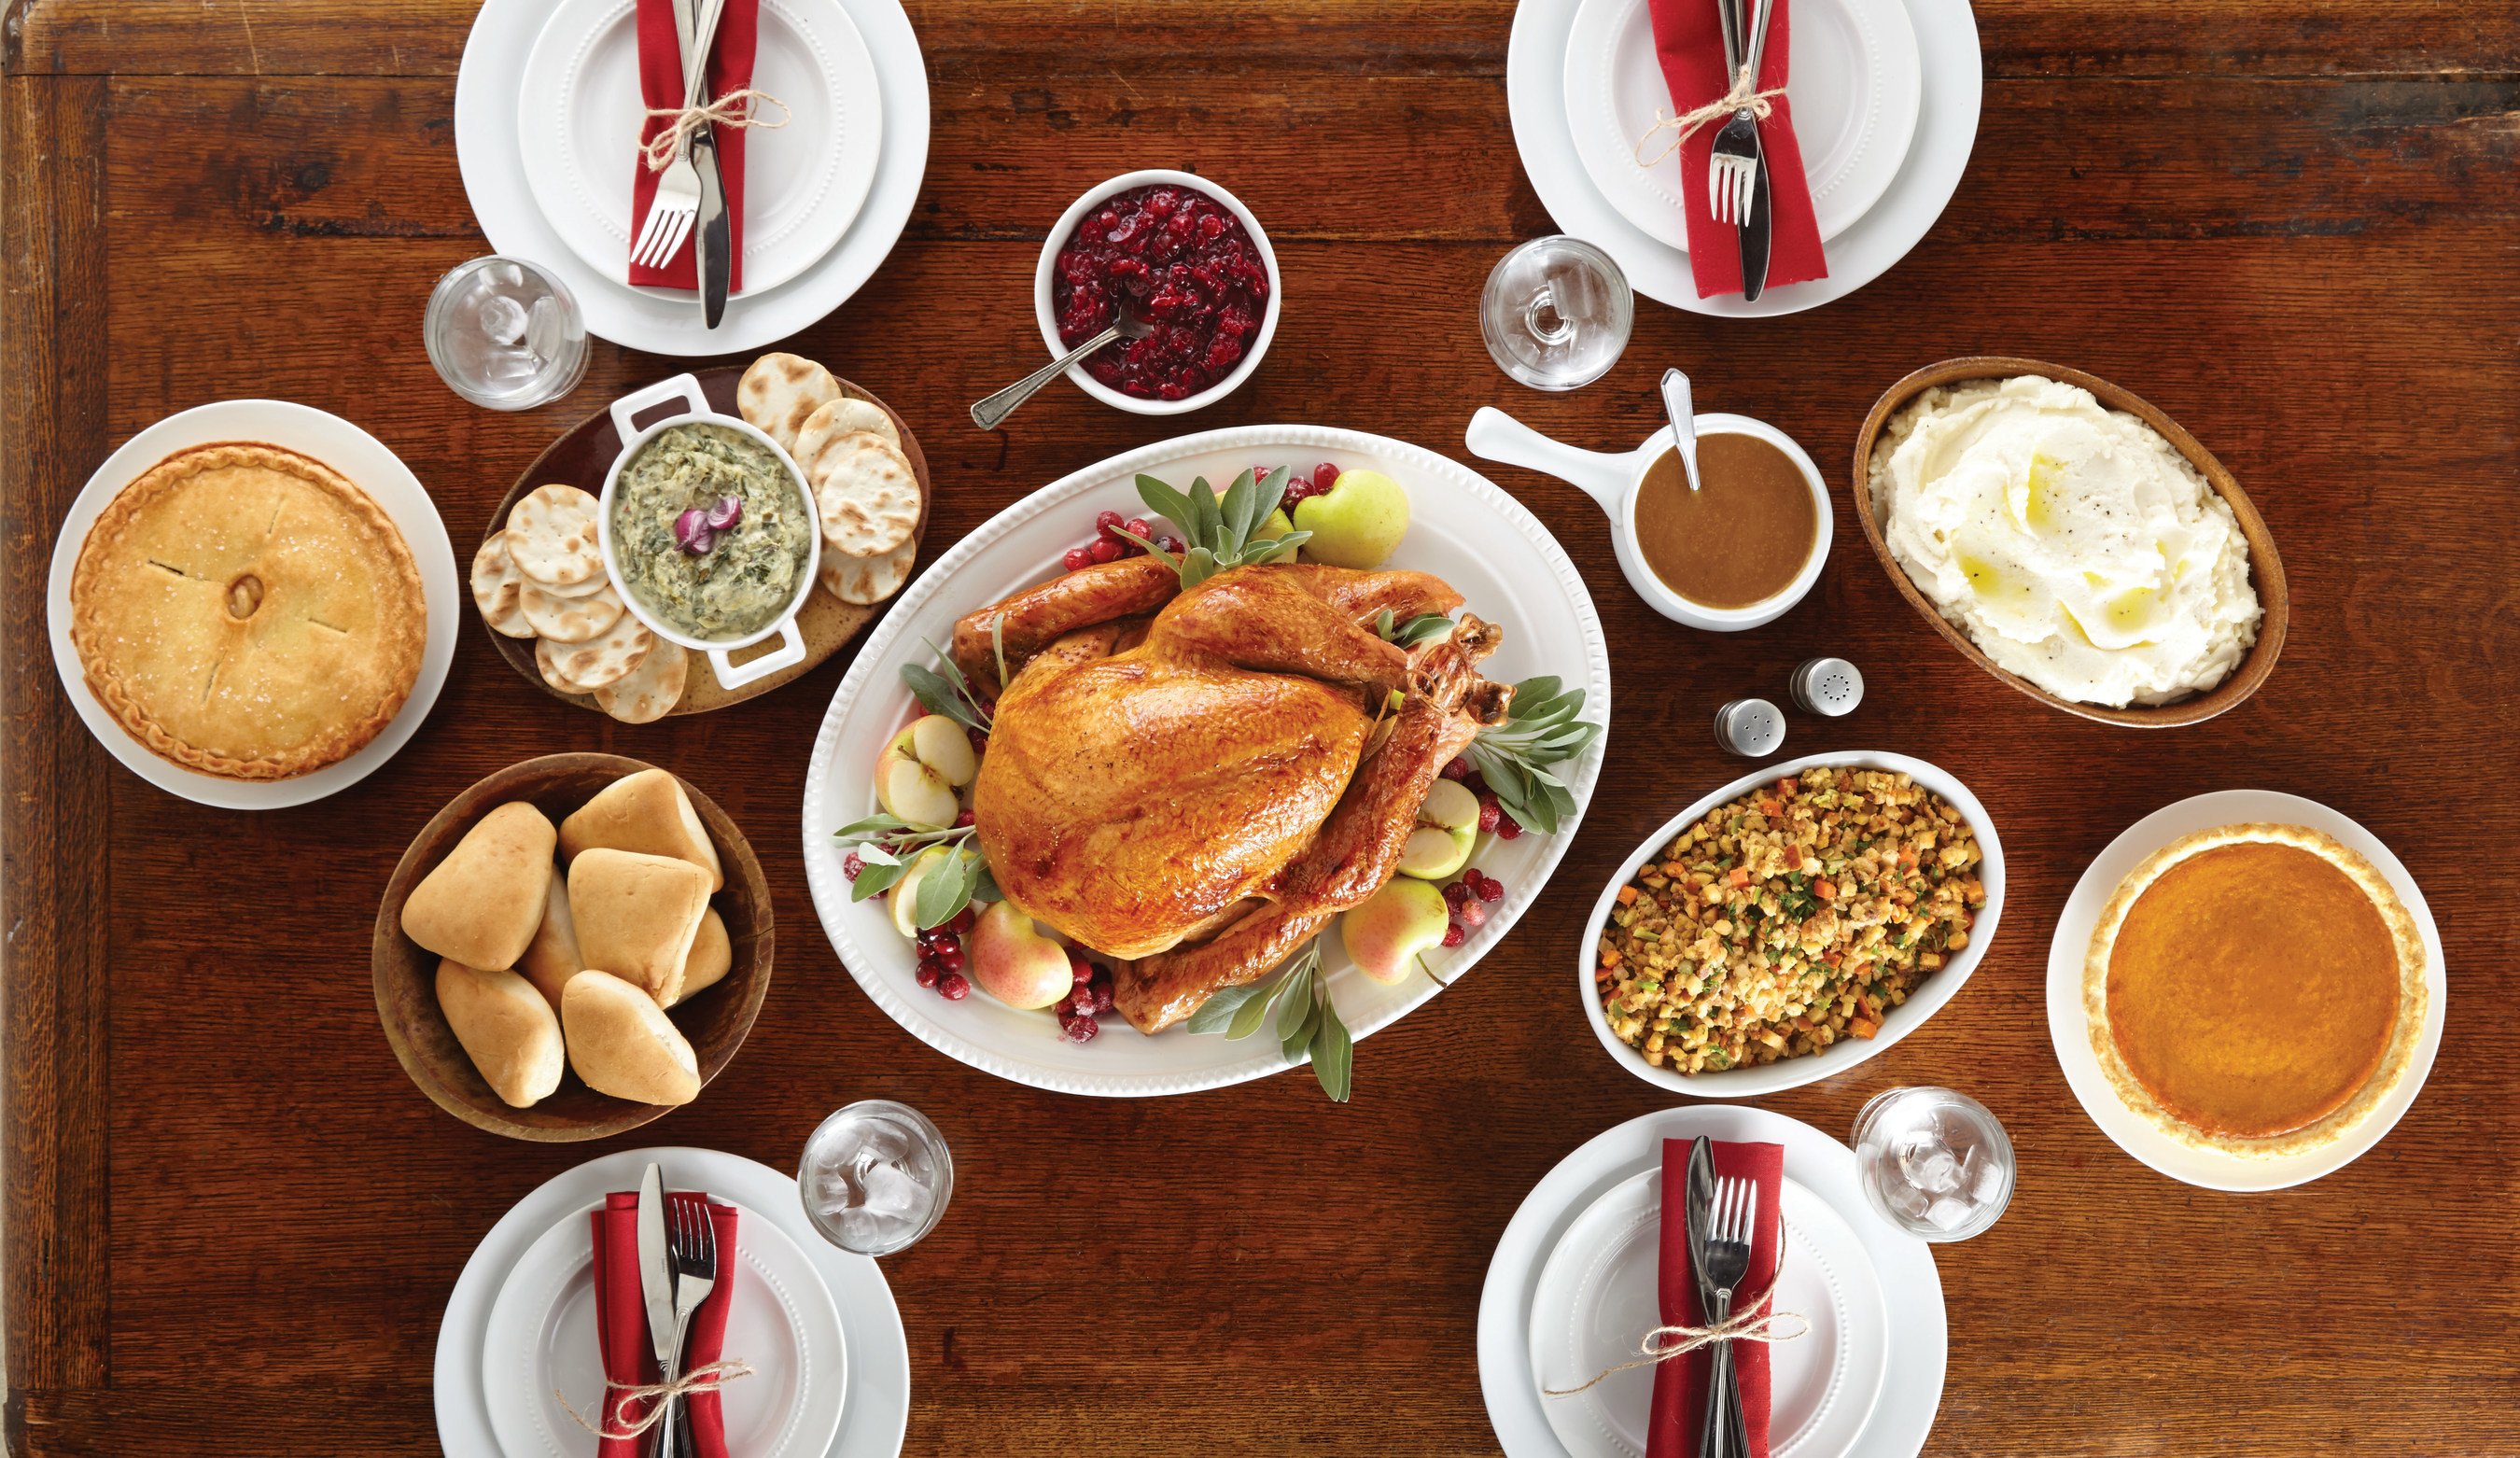 Boston Market Heat & Serve Thanksgiving Meals can feed four to 12 guests. A Thanksgiving meal for 12 includes turkey, mashed potatoes and gravy, cranberry walnut relish, vegetable stuffing, rolls, an appetizer and pies for $9.17 per person.